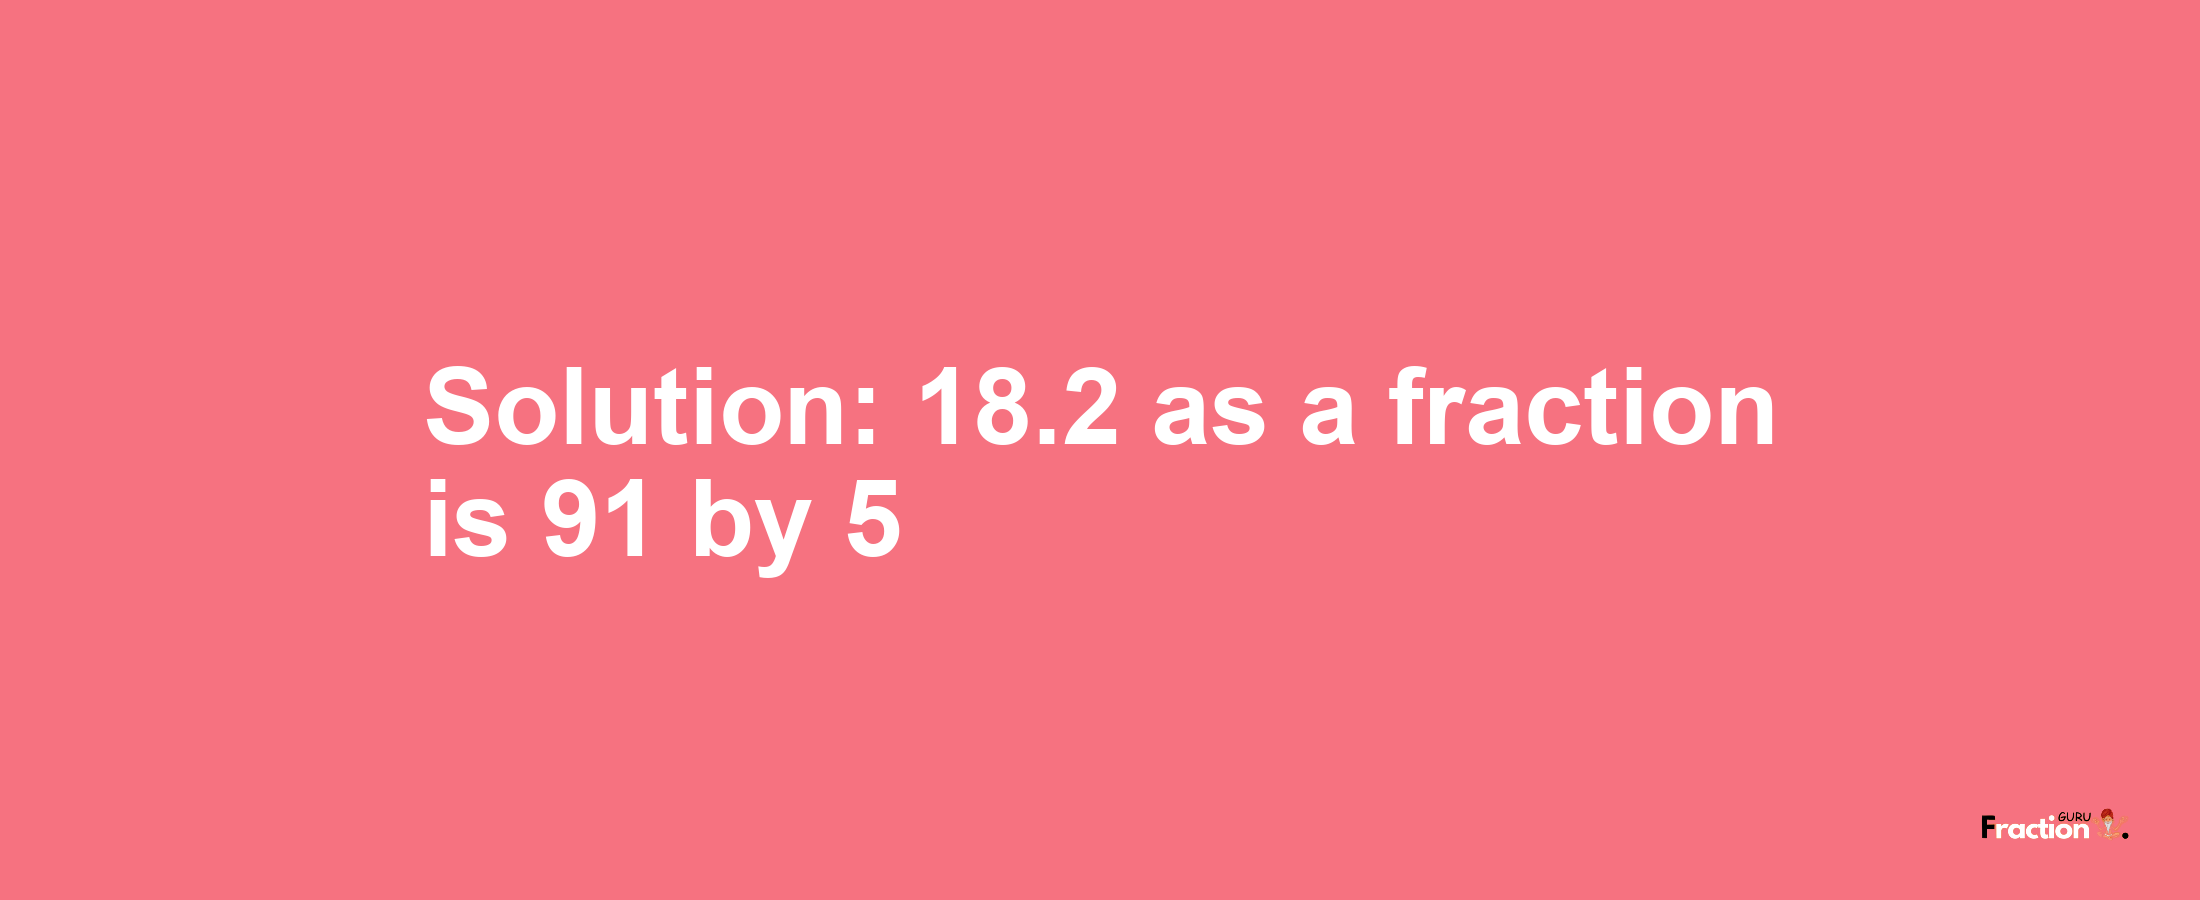 Solution:18.2 as a fraction is 91/5